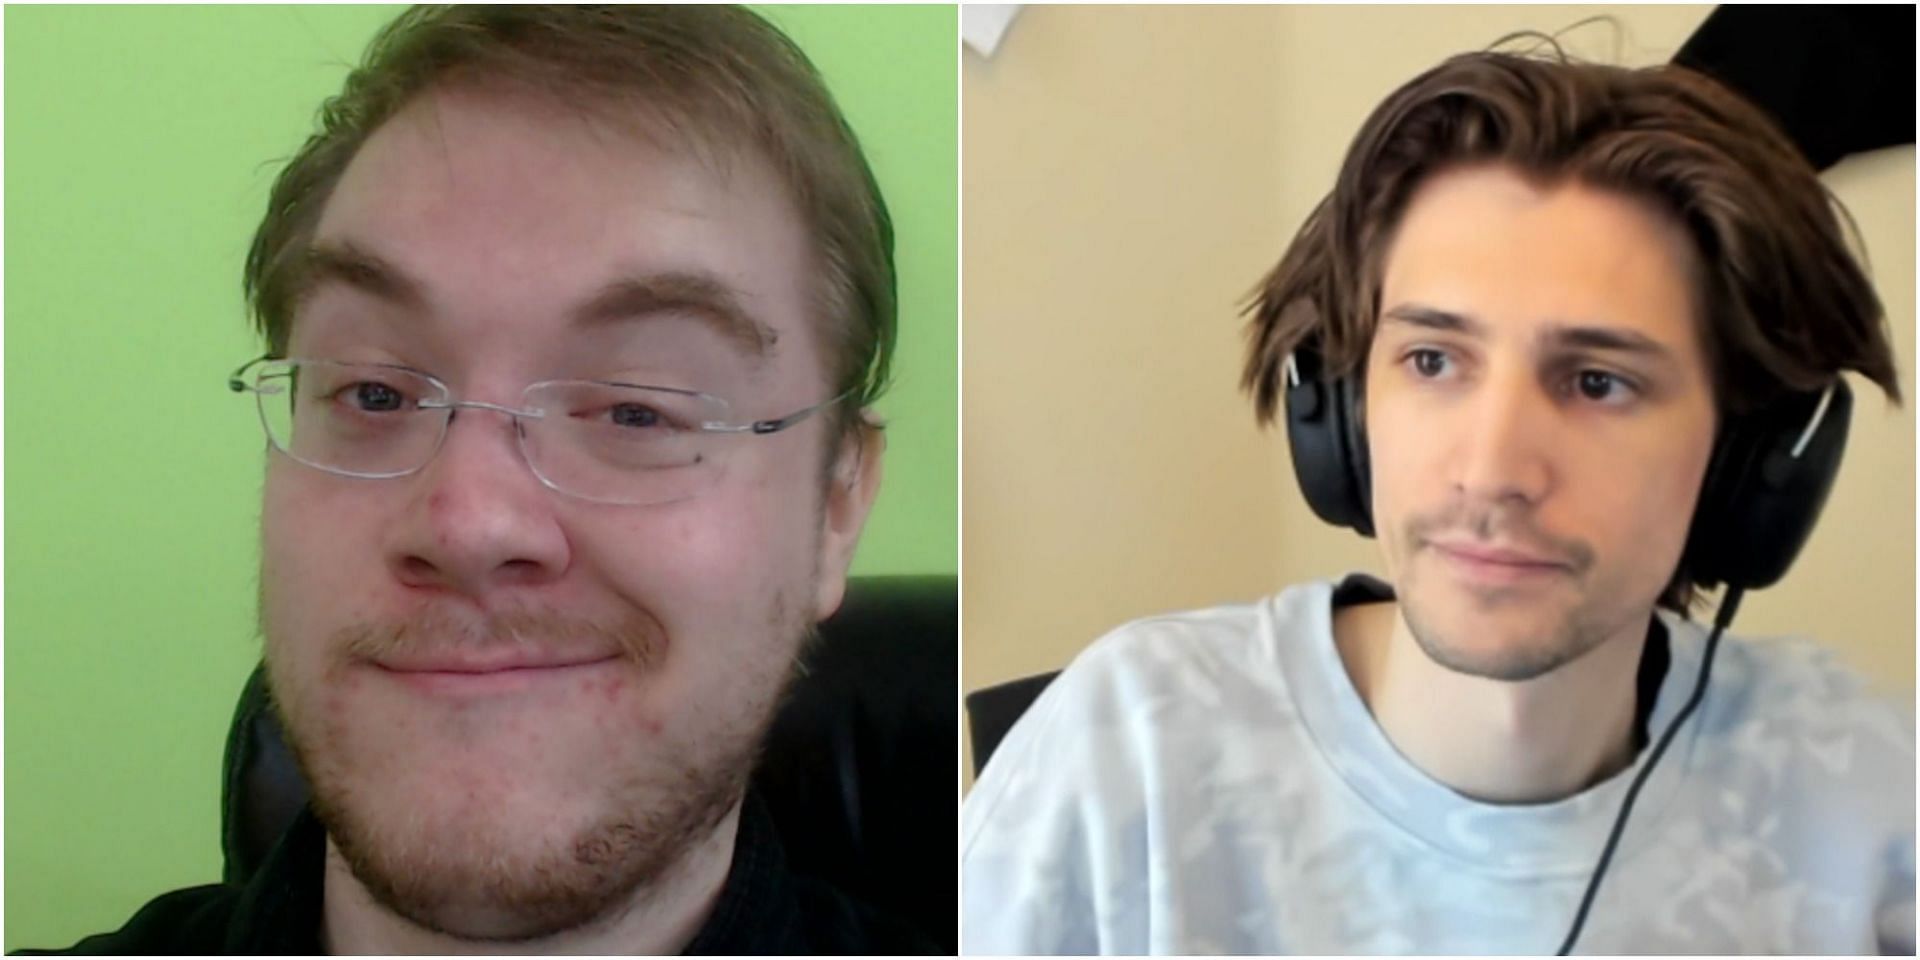 xQc was involved in a heated discussion with AdmiralBahroo on Twitter (Image via AdmiralBahroo, xQc)